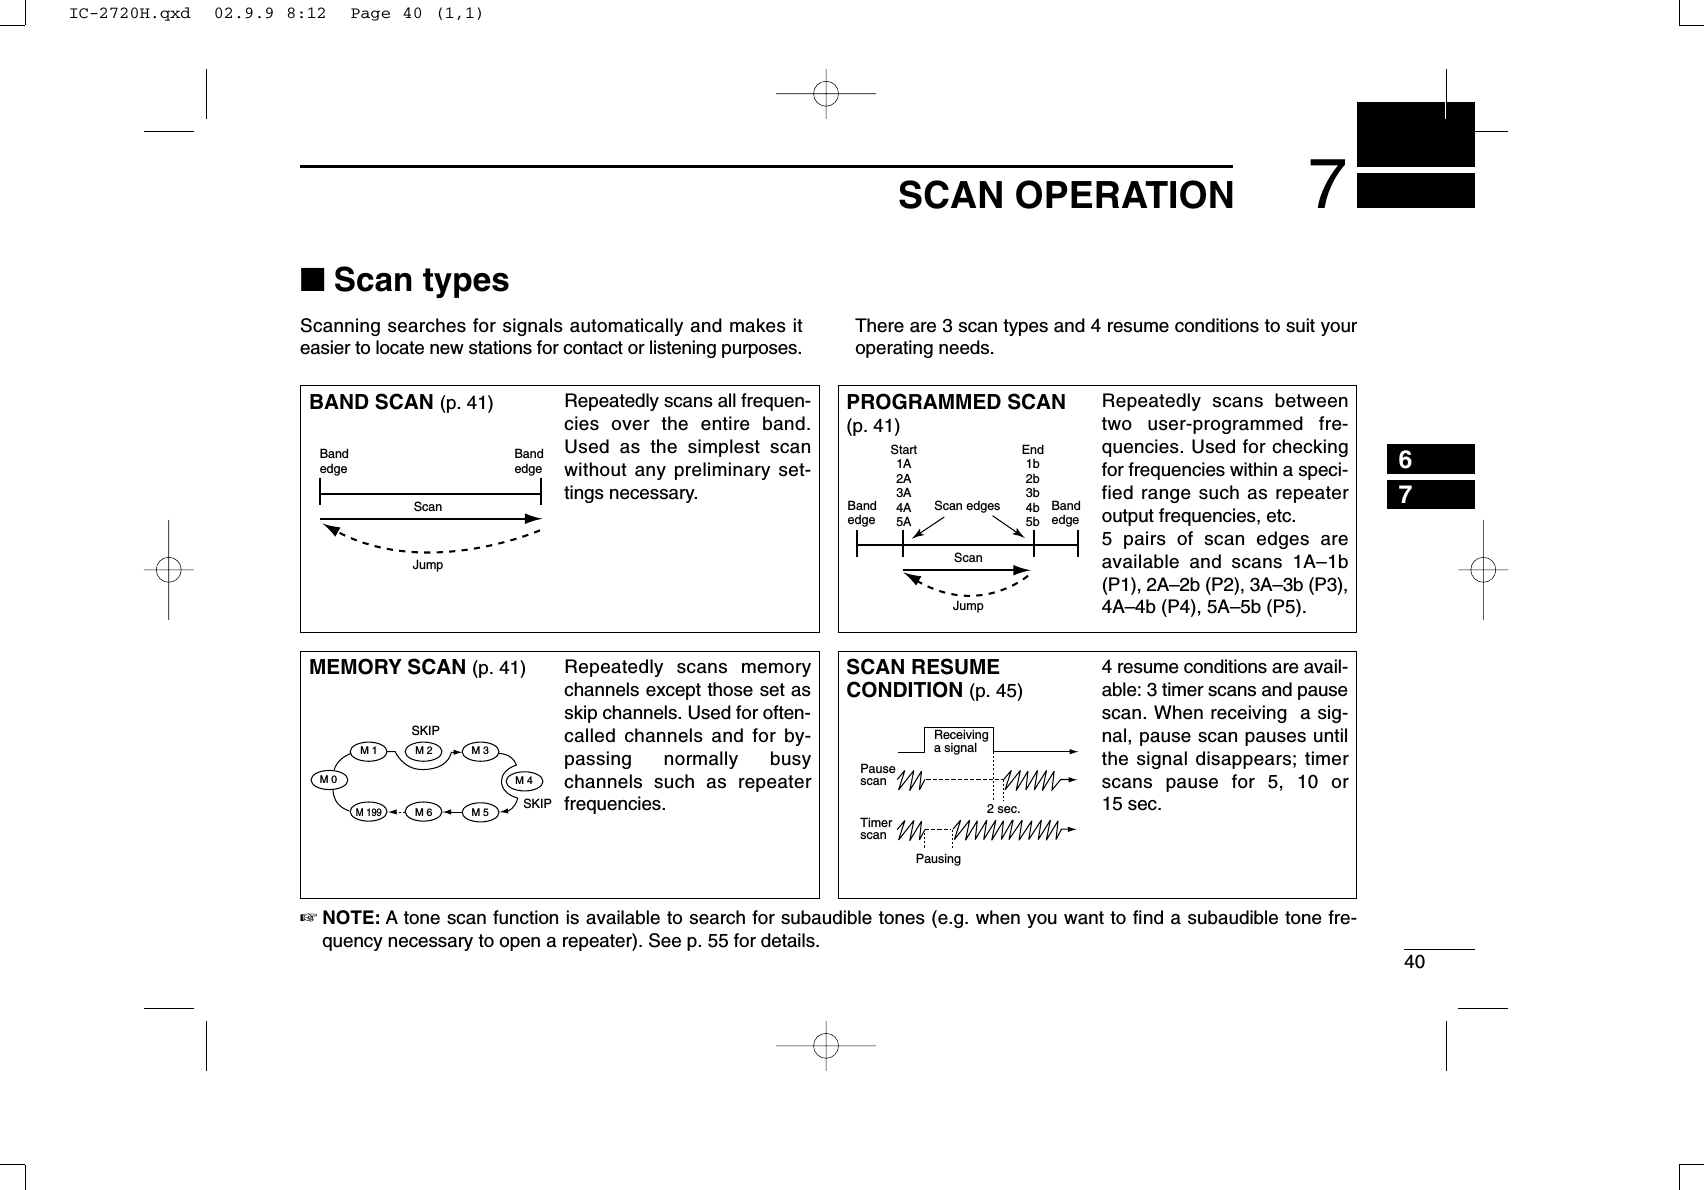 407SCAN OPERATION67■Scan typesScanning searches for signals automatically and makes iteasier to locate new stations for contact or listening purposes.There are 3 scan types and 4 resume conditions to suit youroperating needs.BAND SCAN (p. 41) Repeatedly scans all frequen-cies over the entire band.Used as the simplest scanwithout any preliminary set-tings necessary.BandedgeBandedgeScanJumpPROGRAMMED SCAN(p. 41)Repeatedly scans betweentwo user-programmed fre-quencies. Used for checkingfor frequencies within a speci-fied range such as repeateroutput frequencies, etc. 5 pairs of scan edges areavailable and scans 1A–1b(P1), 2A–2b (P2), 3A–3b (P3),4A–4b (P4), 5A–5b (P5).BandedgeBandedgeScan edgesScanJump1A2A3A4A5A1b2b3b4b5bStart EndMEMORY SCAN (p. 41) Repeatedly scans memorychannels except those set asskip channels. Used for often-called channels and for by-passing normally busychannels such as repeaterfrequencies.SKIPSKIPM 0 M 4M 1 M 2 M 3M 5M 199M 6SCAN RESUMECONDITION (p. 45)4 resume conditions are avail-able: 3 timer scans and pausescan. When receiving  a sig-nal, pause scan pauses untilthe signal disappears; timerscans pause for 5, 10 or15 sec.PausescanReceivinga signalTimerscanPausing2 sec.☞NOTE: A tone scan function is available to search for subaudible tones (e.g. when you want to ﬁnd a subaudible tone fre-quency necessary to open a repeater). See p. 55 for details.IC-2720H.qxd  02.9.9 8:12  Page 40 (1,1)